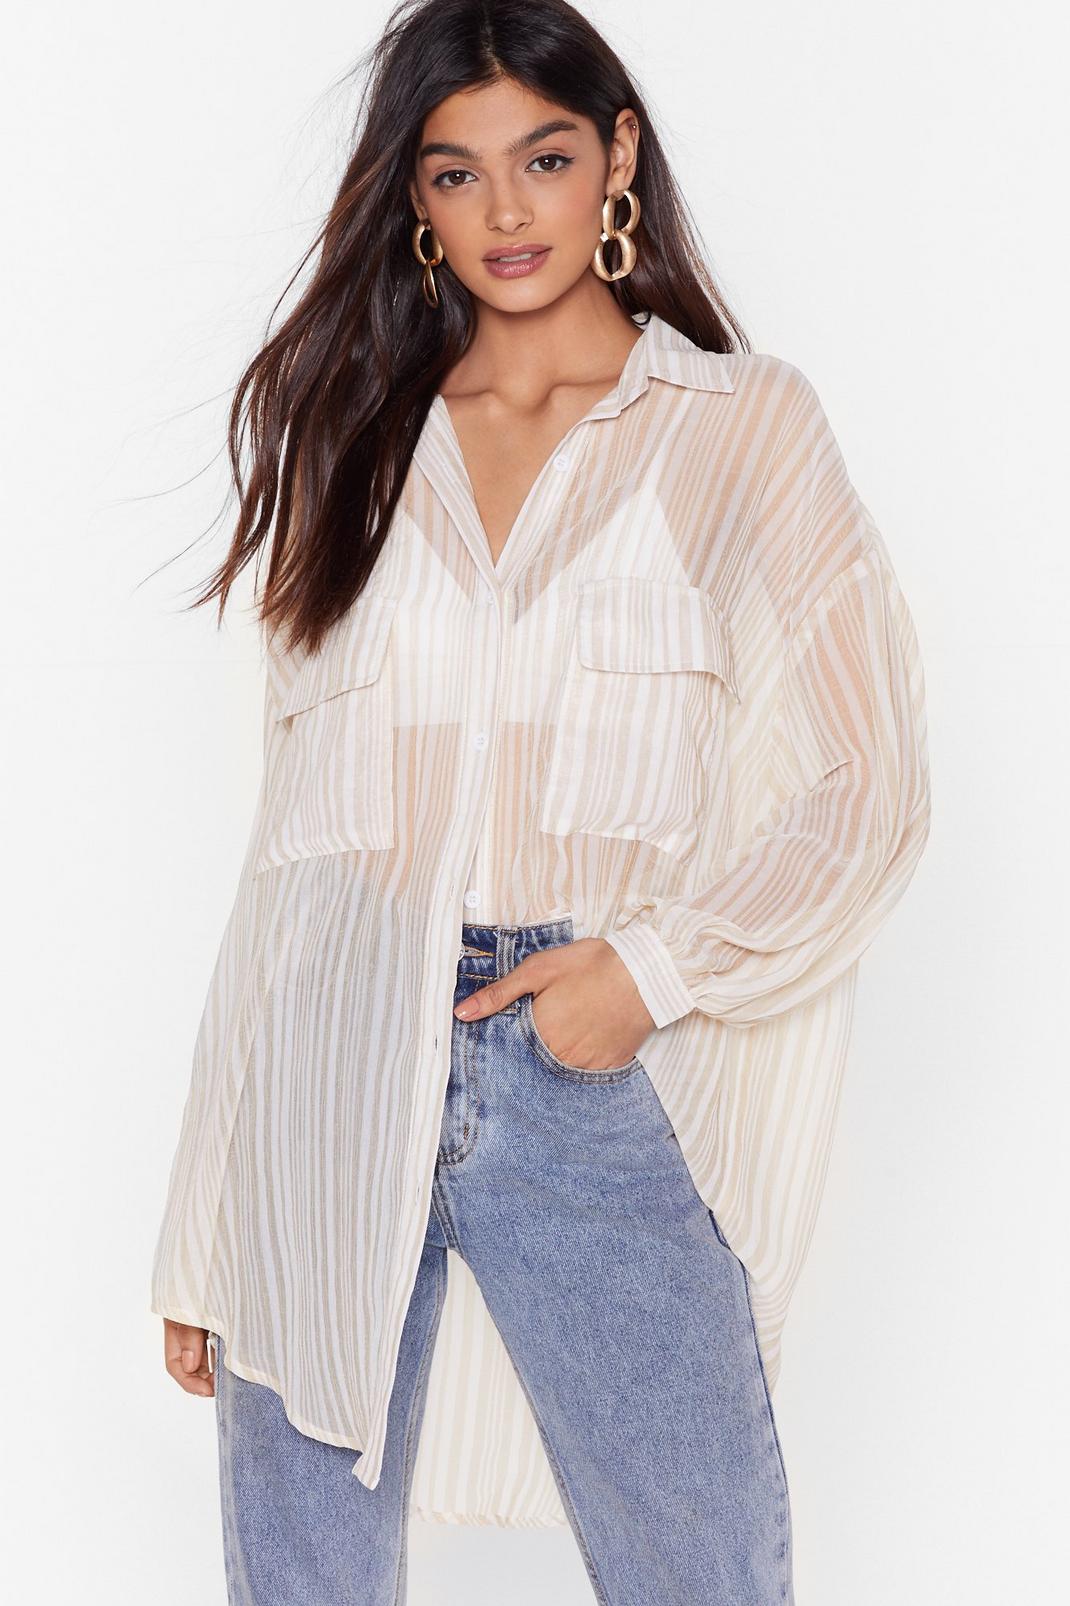 Shirt It Here First Oversized Striped Shirt image number 1